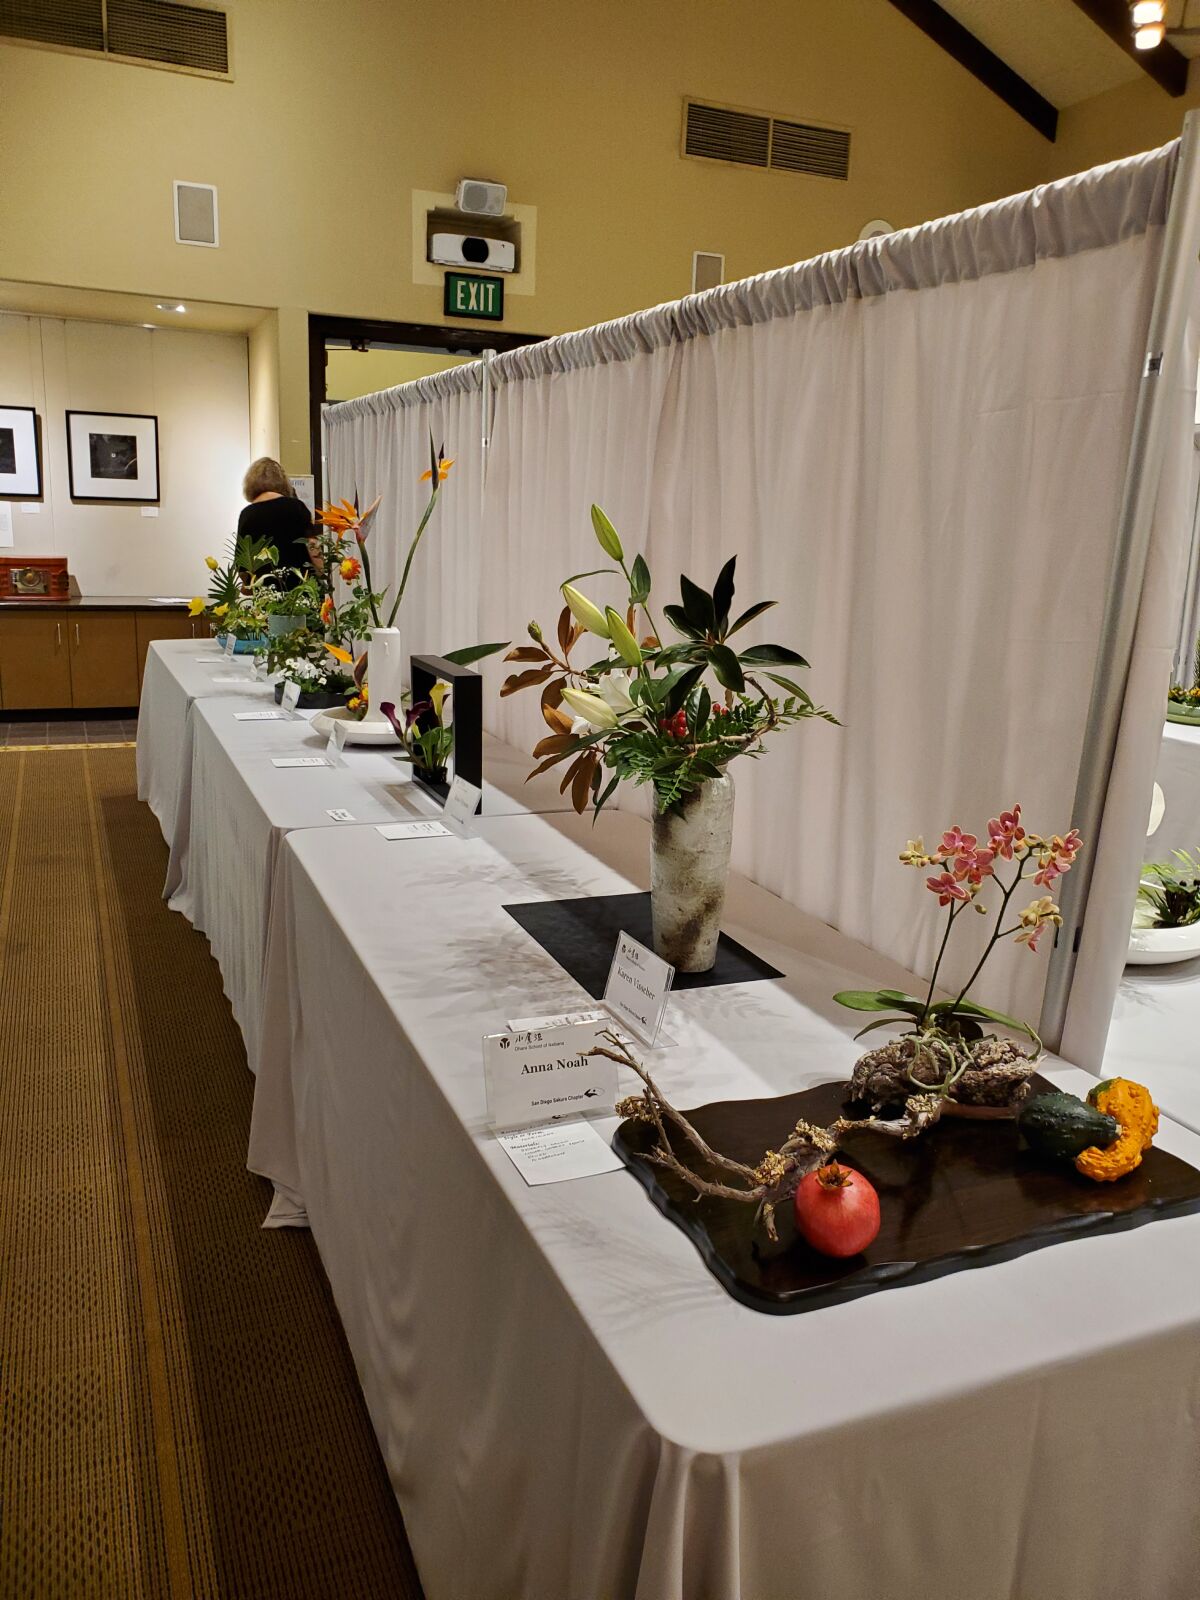 Works of ikebana flower arranging that were on display at the La Jolla/Riford Library on Oct. 21-22.